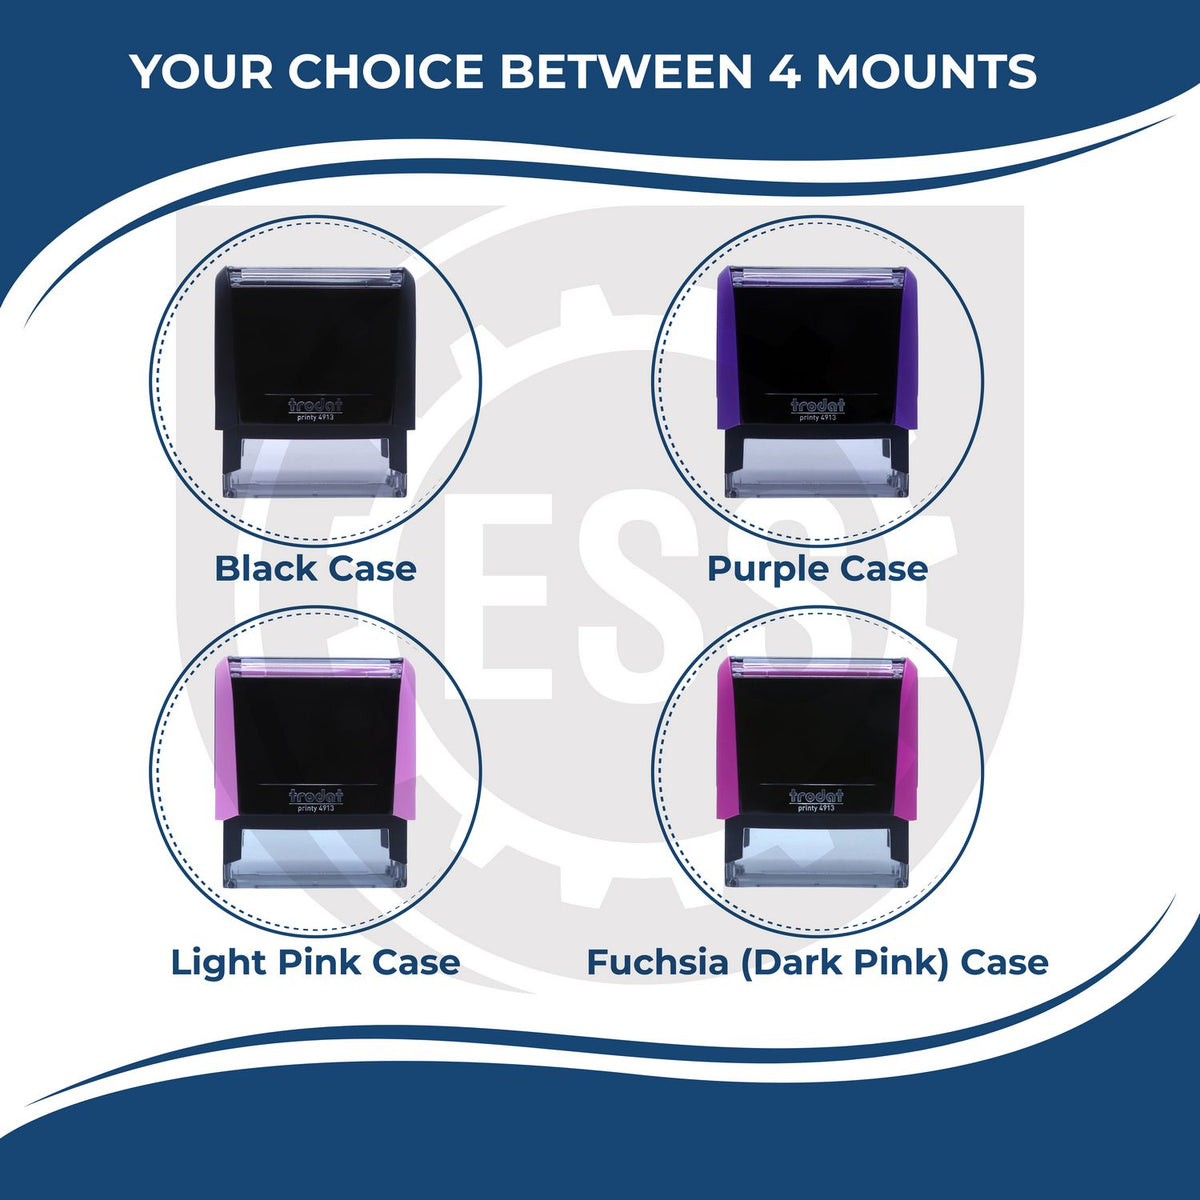 A picture of different colored mounts for the Self-Inking Rectangular Maryland Notary Stamp featurning a Red, Blue or Black Mount